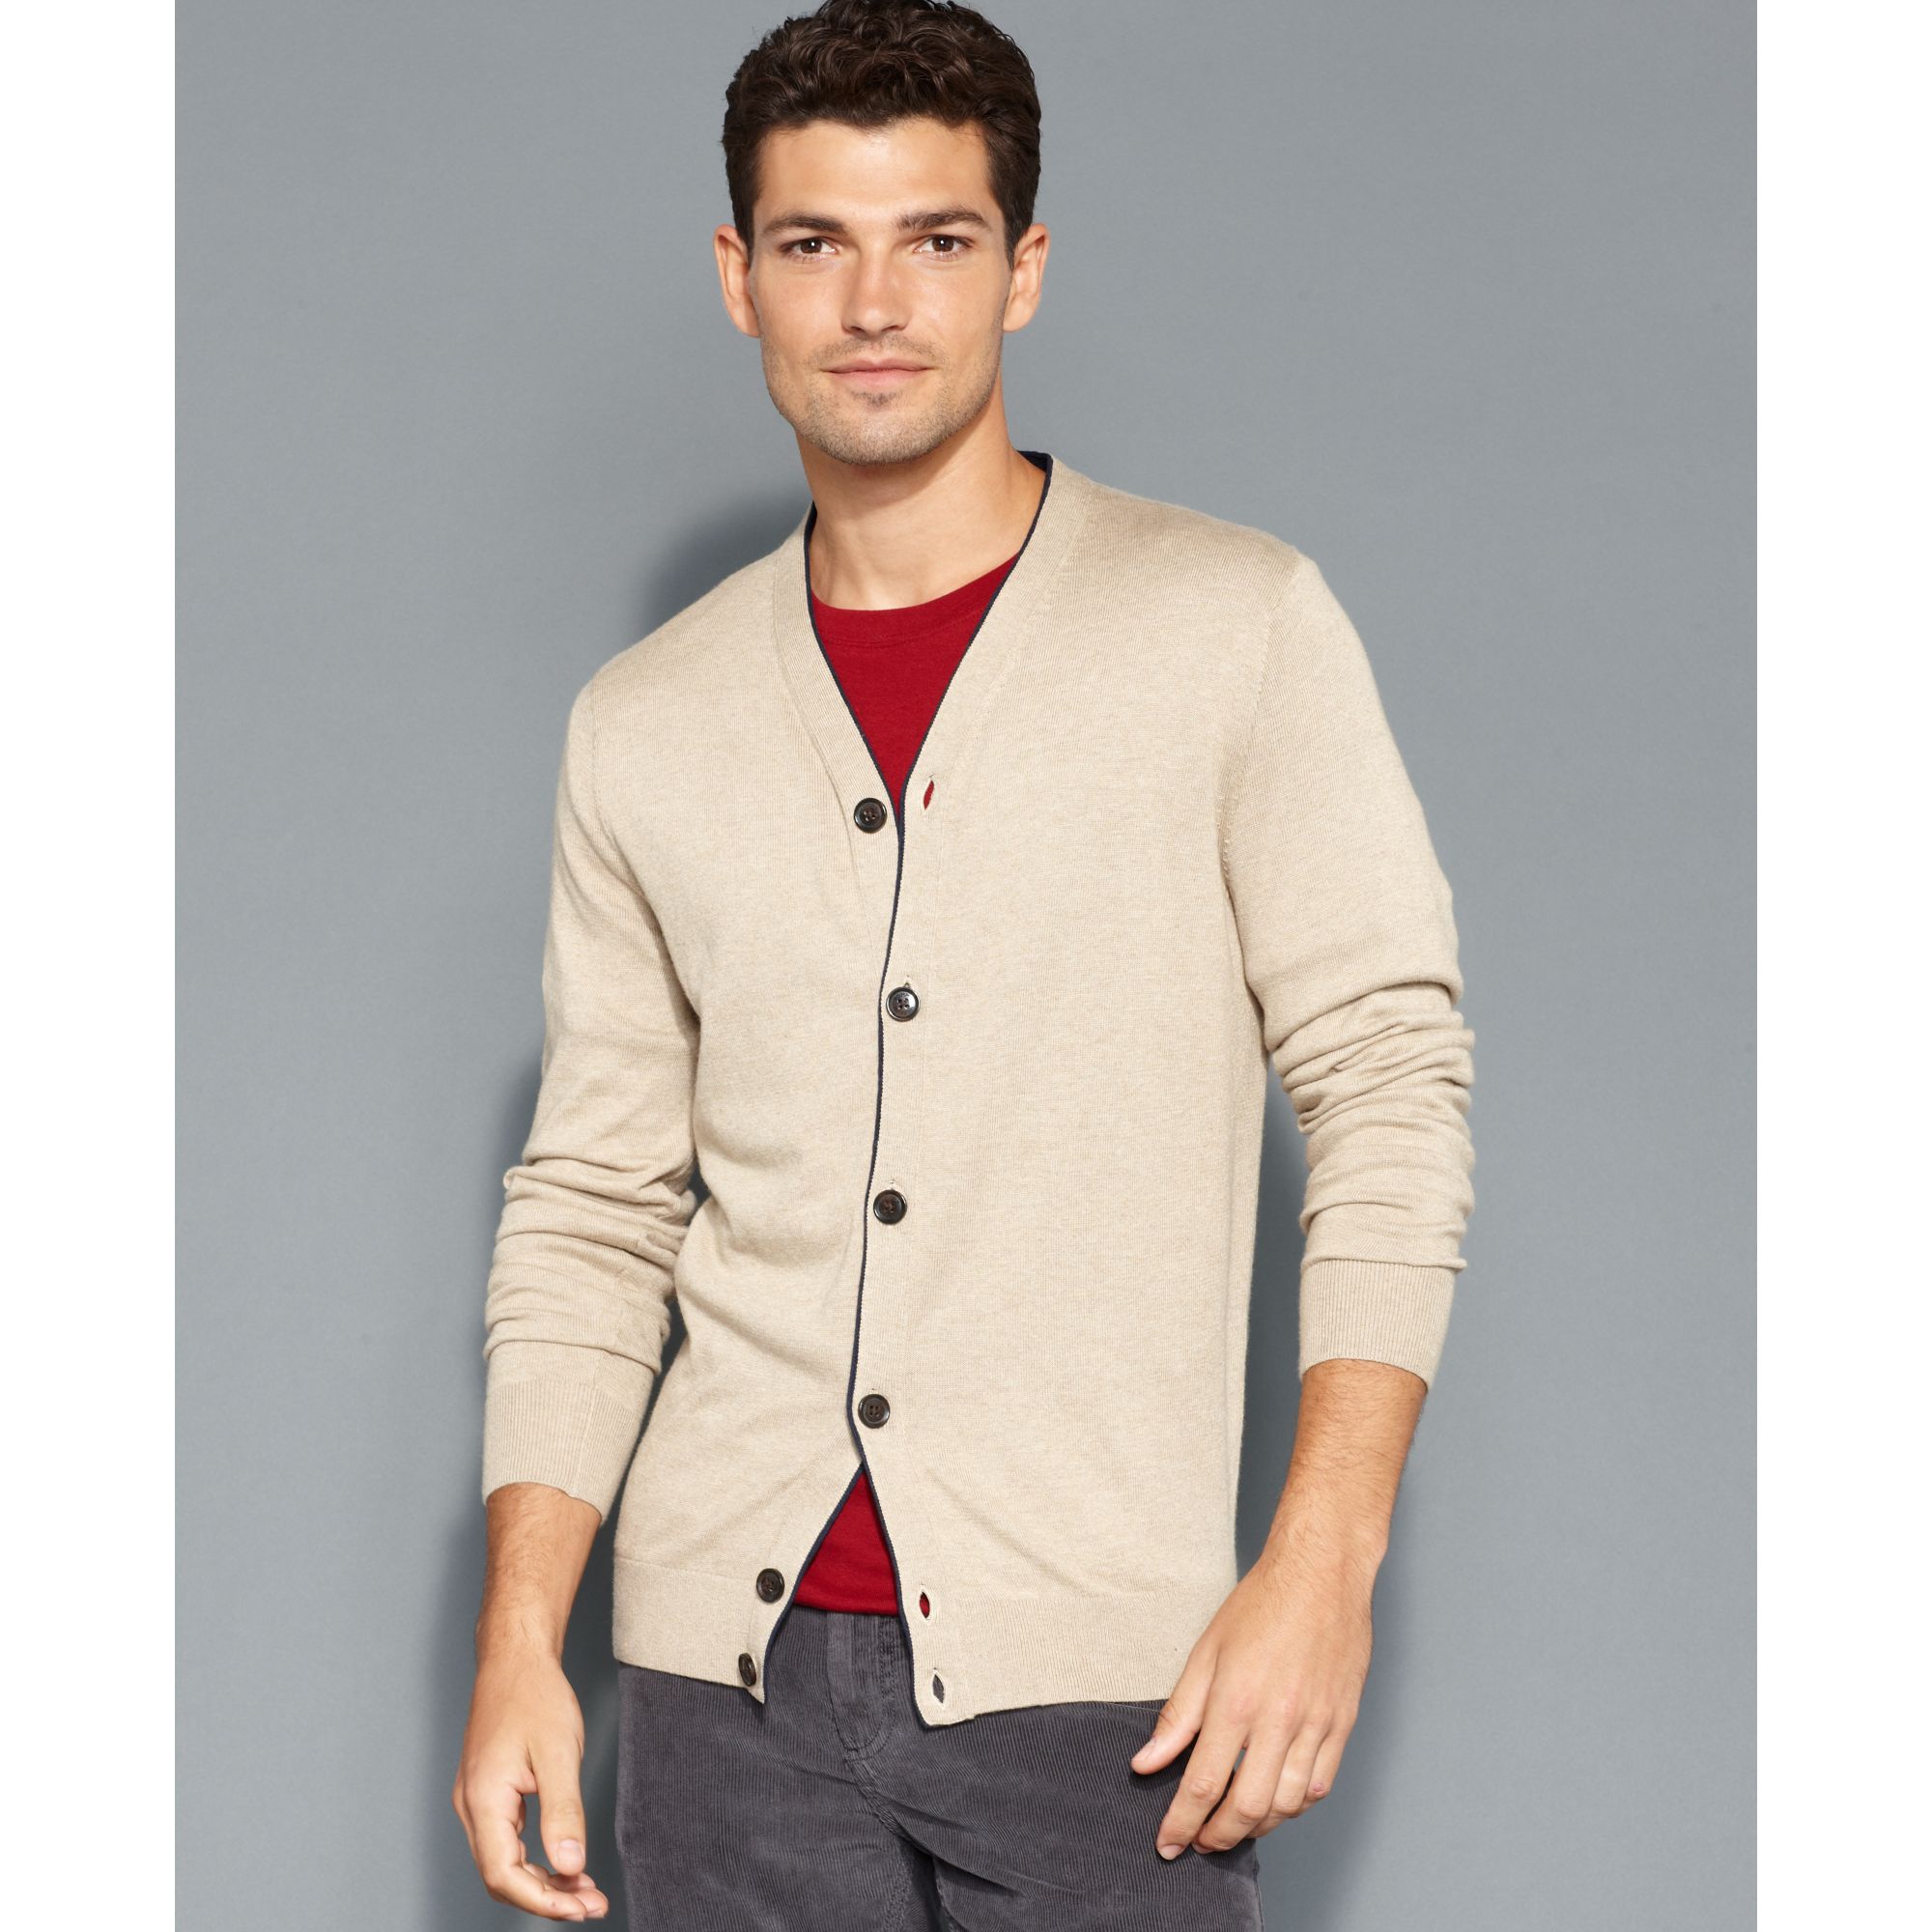 Lyst - Tommy Hilfiger American Tipped Cardigan in Natural for Men